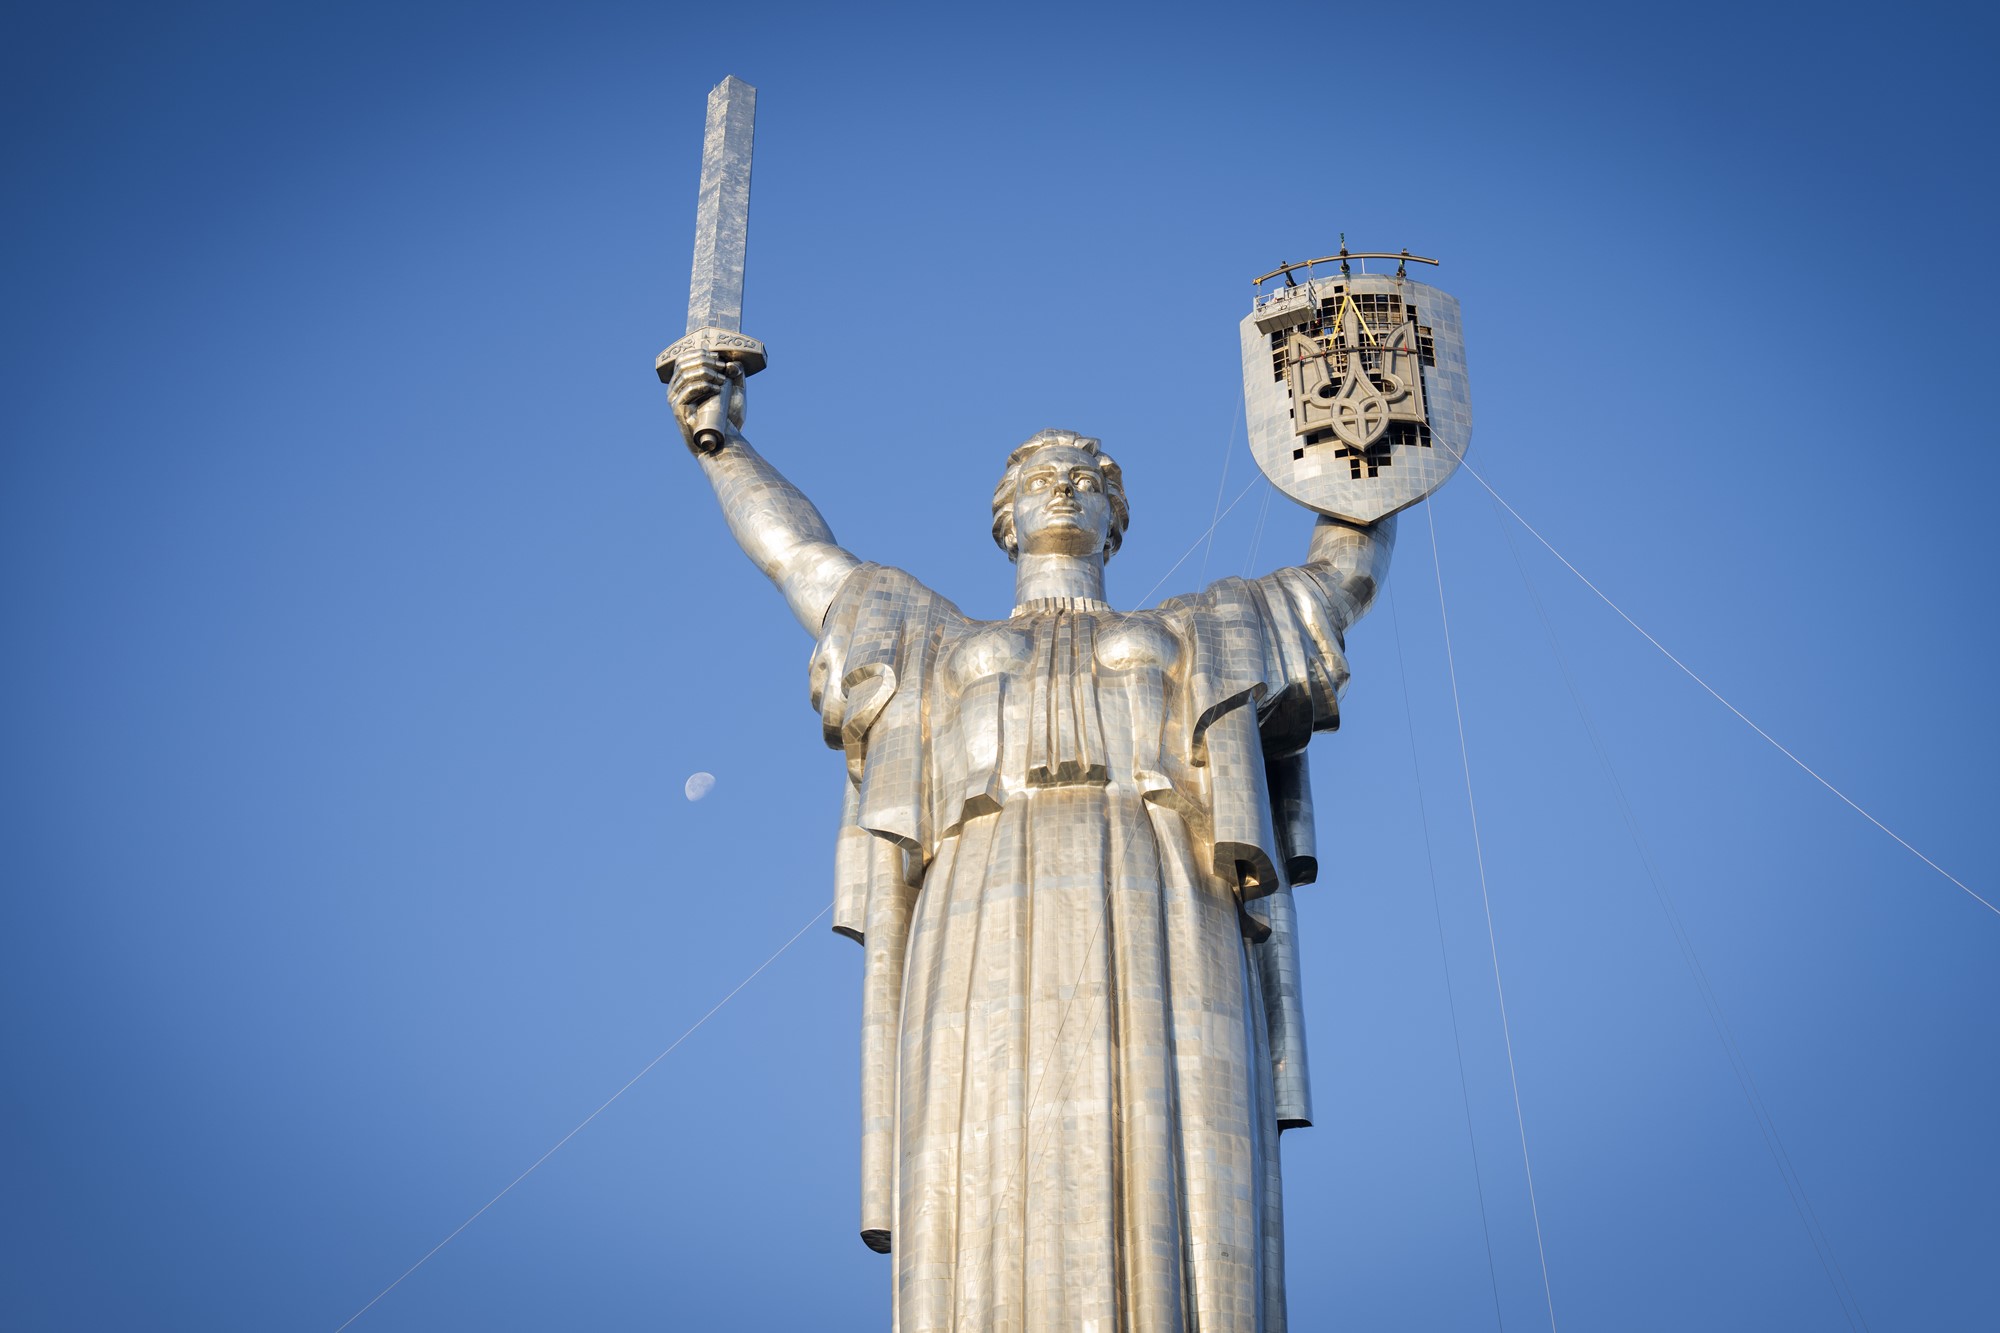 A wide photo looking upwards towards a large outdoor statue of a woman holding a sword and shield